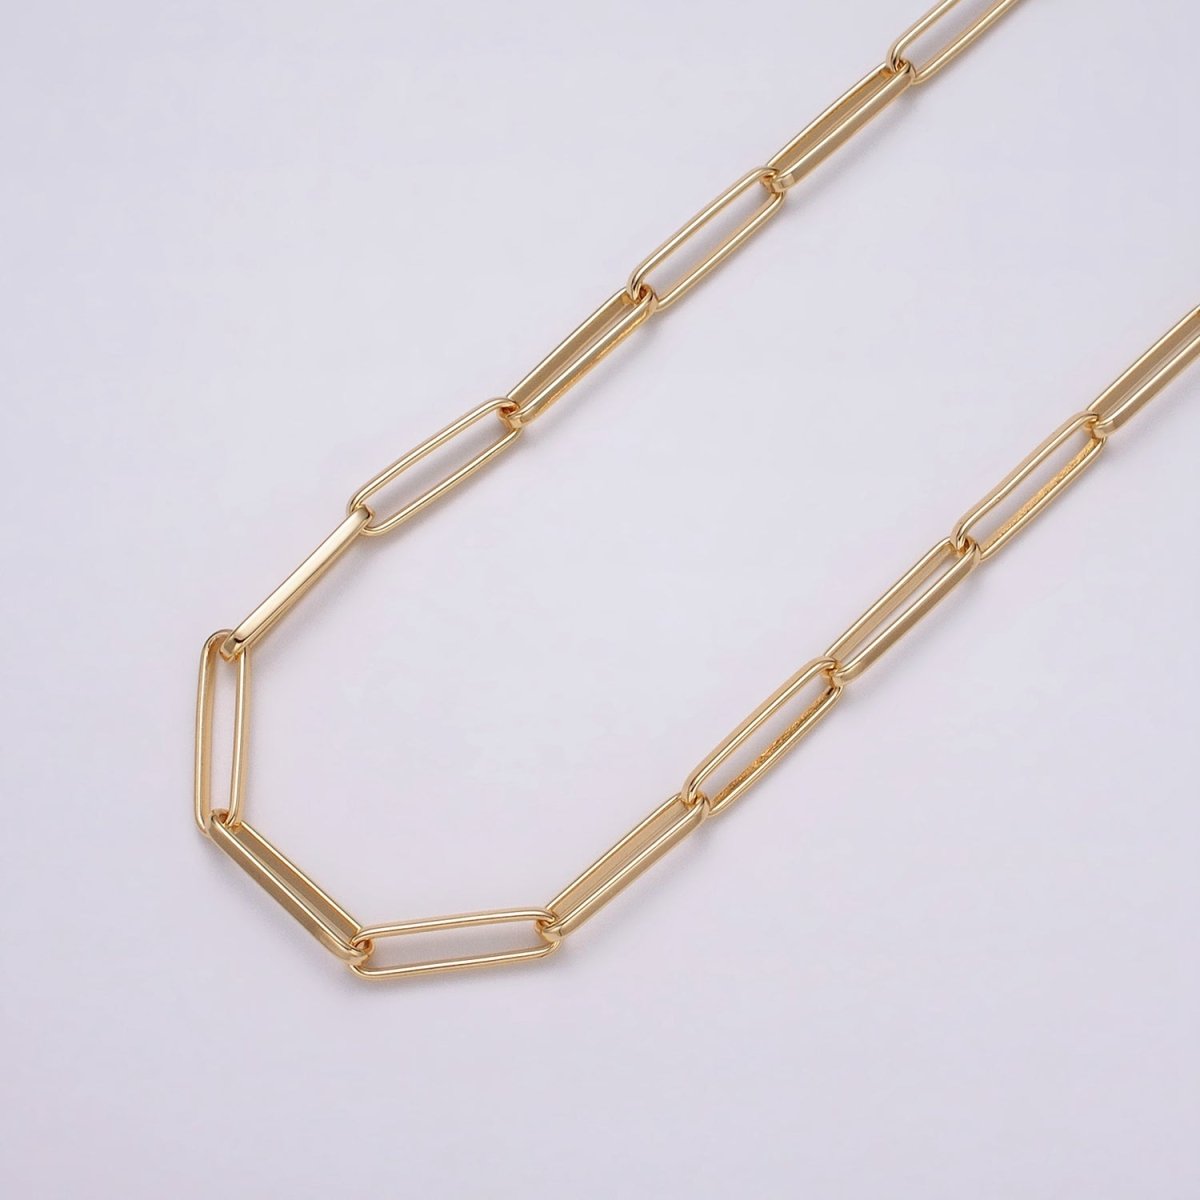 24k Gold Filled Chain by Yard Slim PaperClip Chain Unfinished Chain Wholesale Elongated Oval Link Chain | ROLL-1285 ROLL-1286 Clearance Pricing - DLUXCA